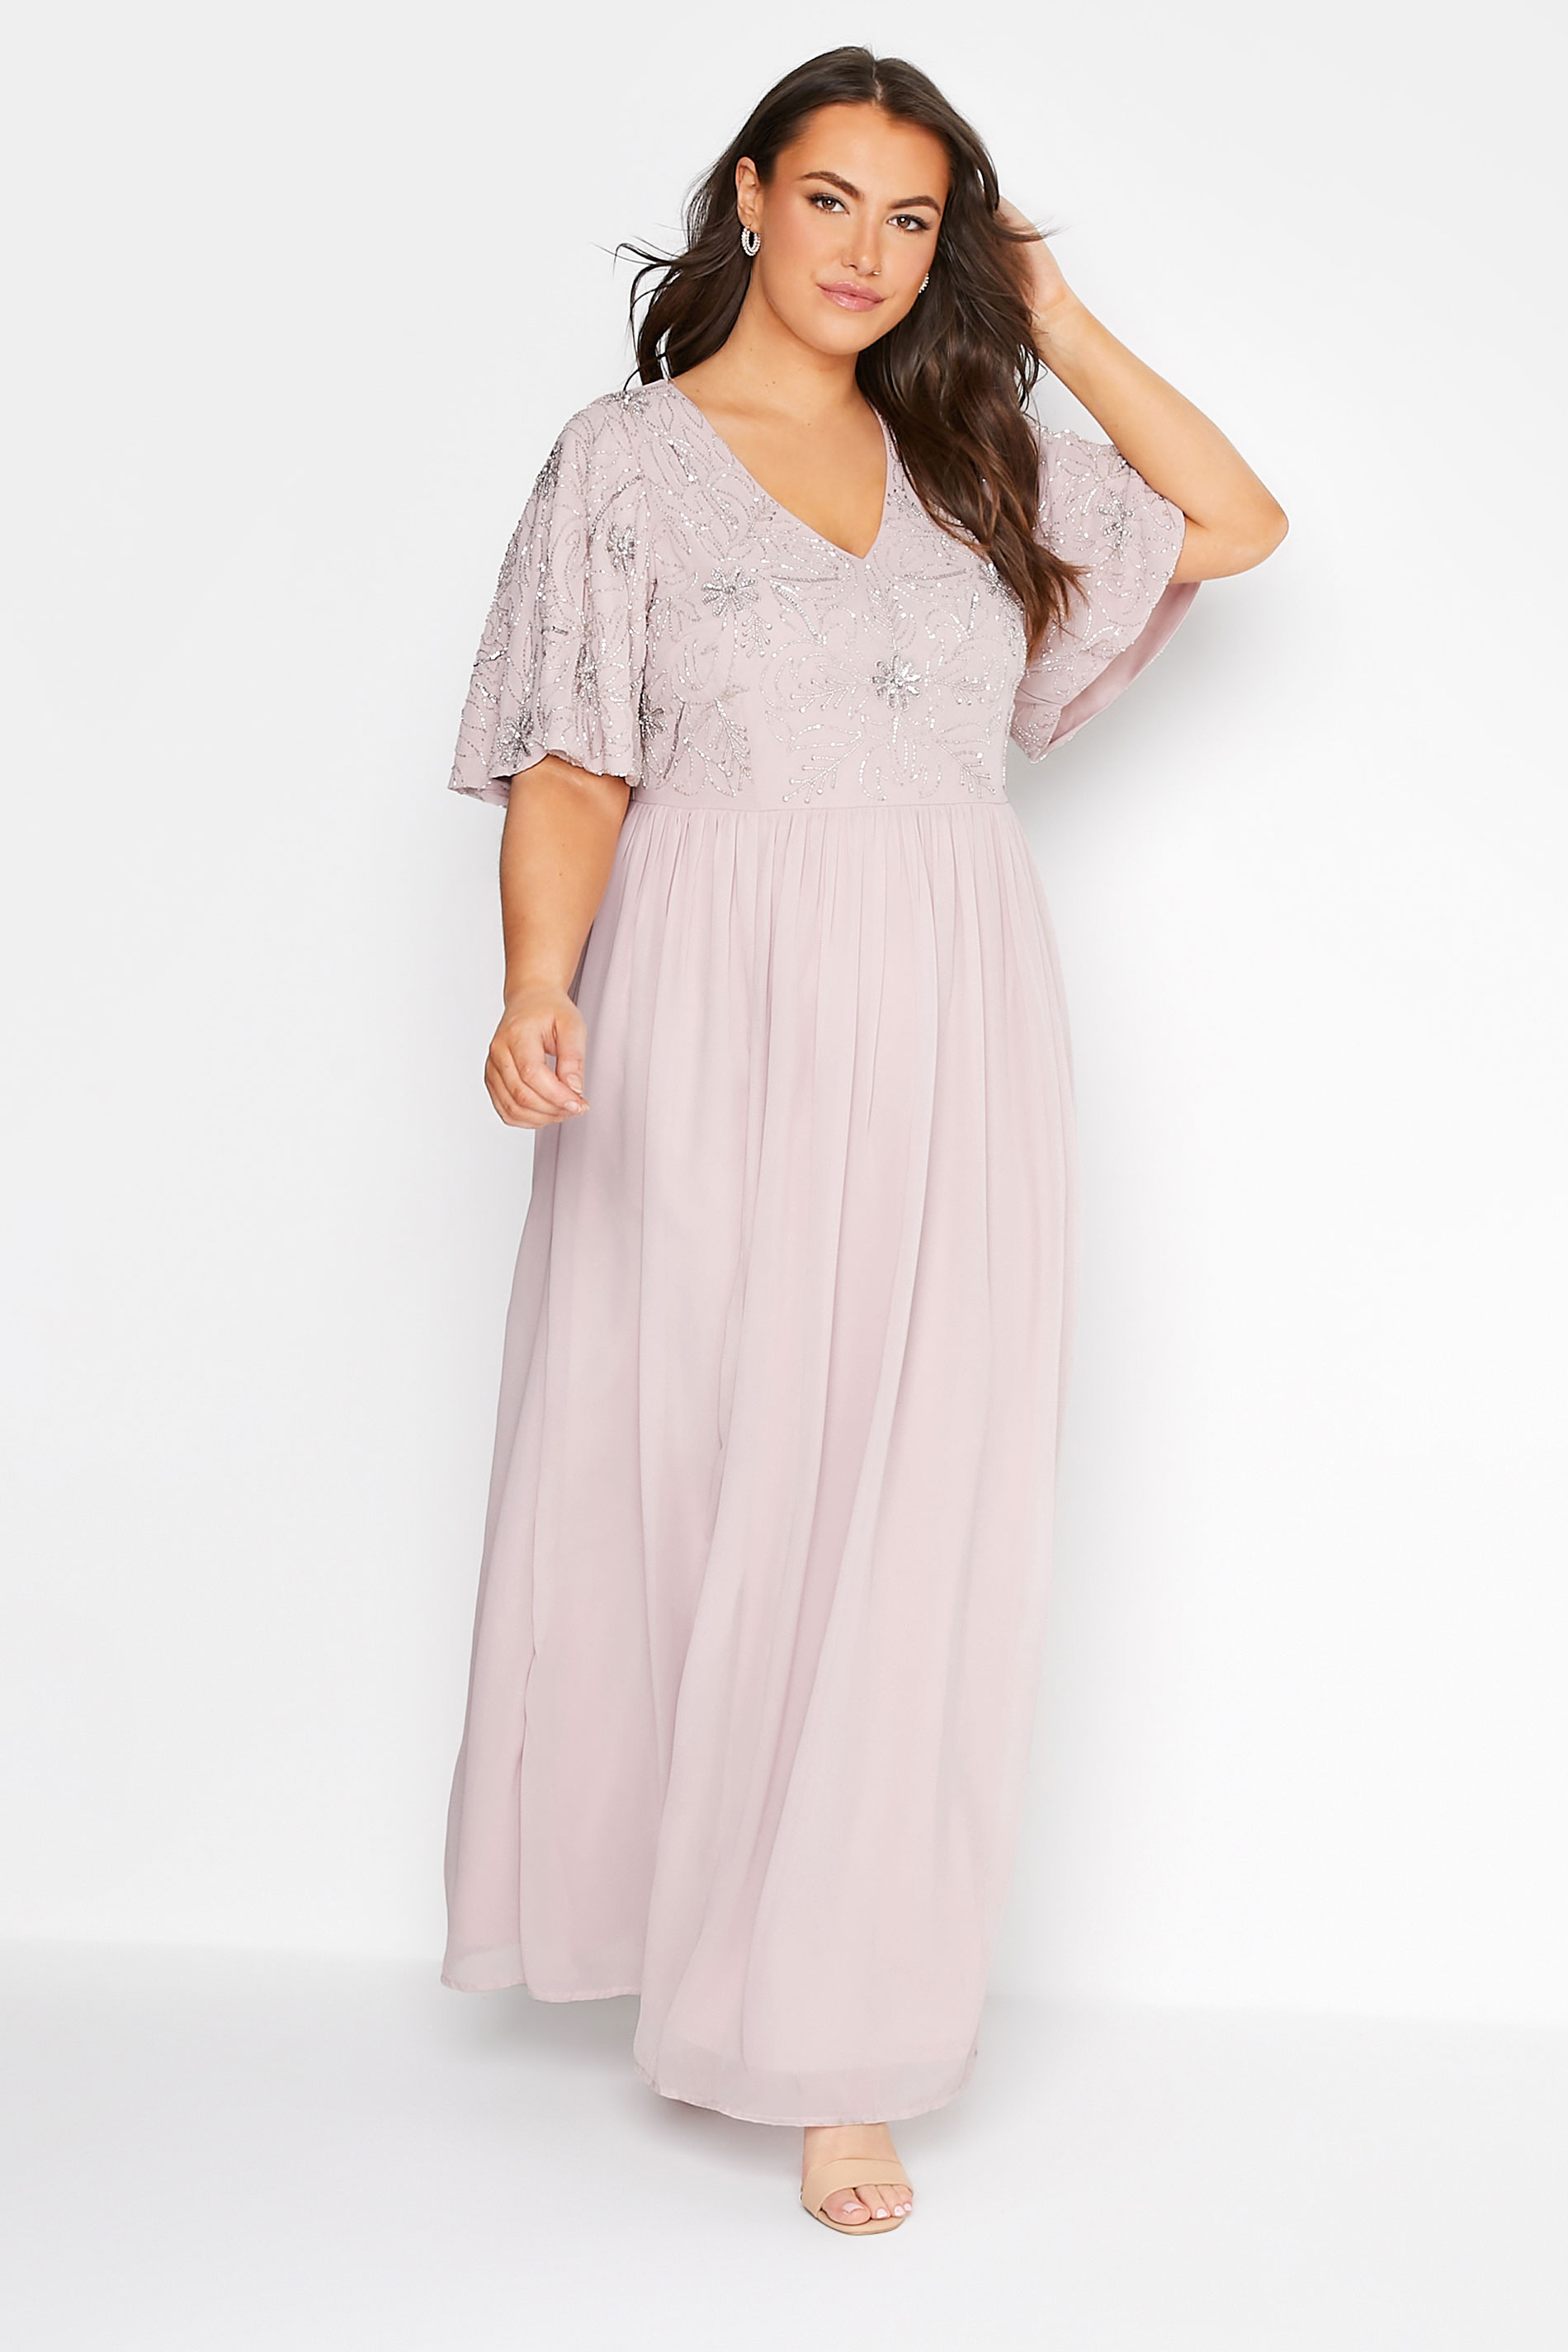 LUXE Curve Pink Floral Embellished Maxi Dress_B.jpg